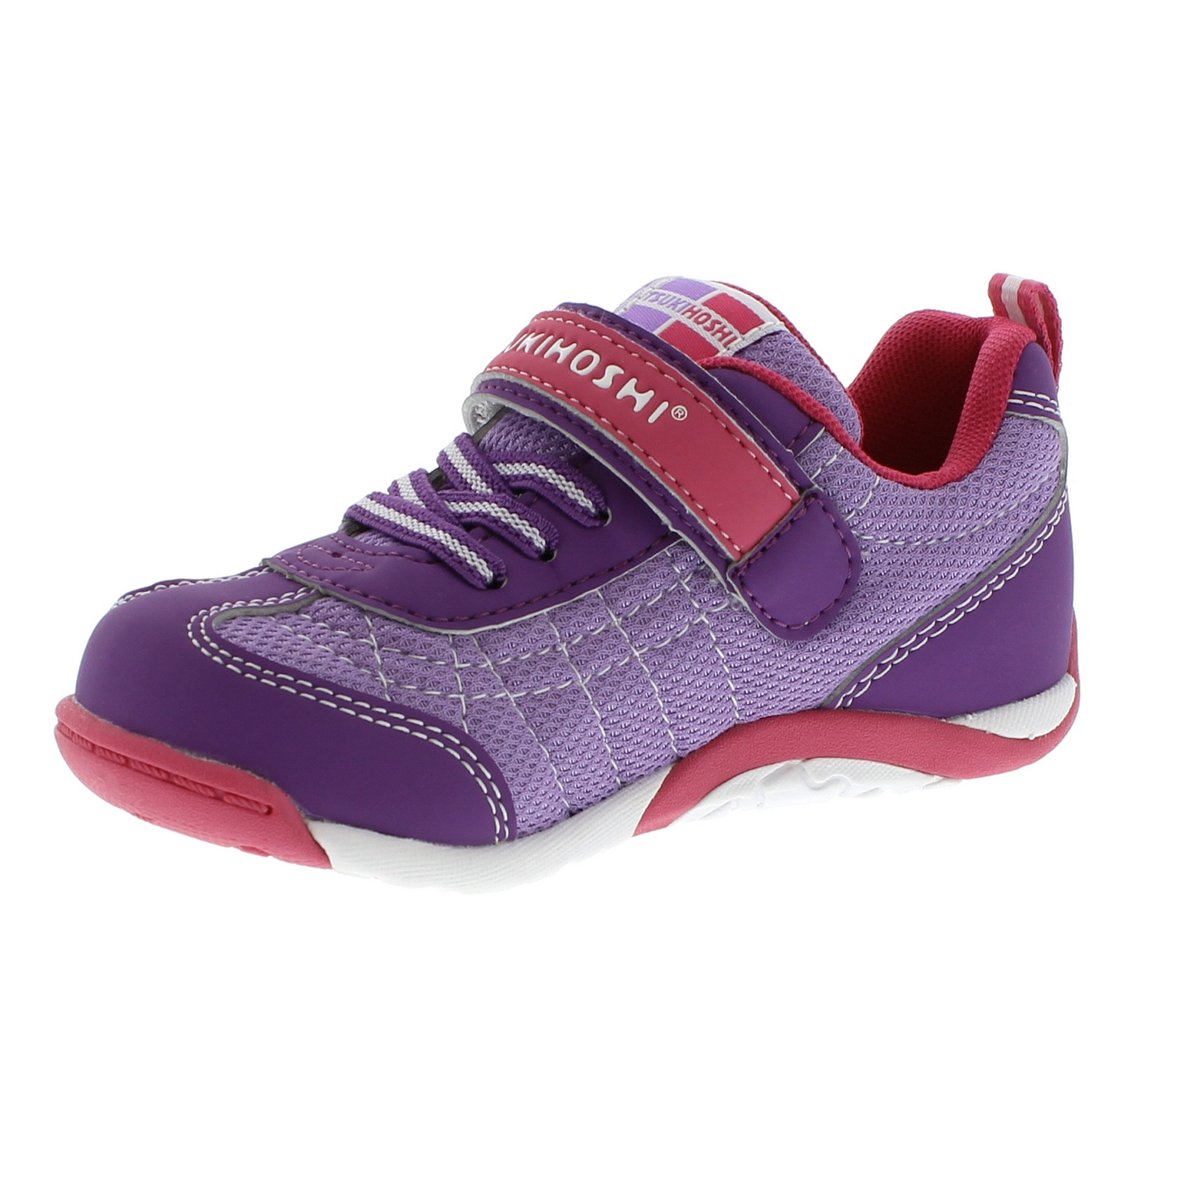 Child Tsukihoshi Kaz Sneaker in Purple/Berry from the front view